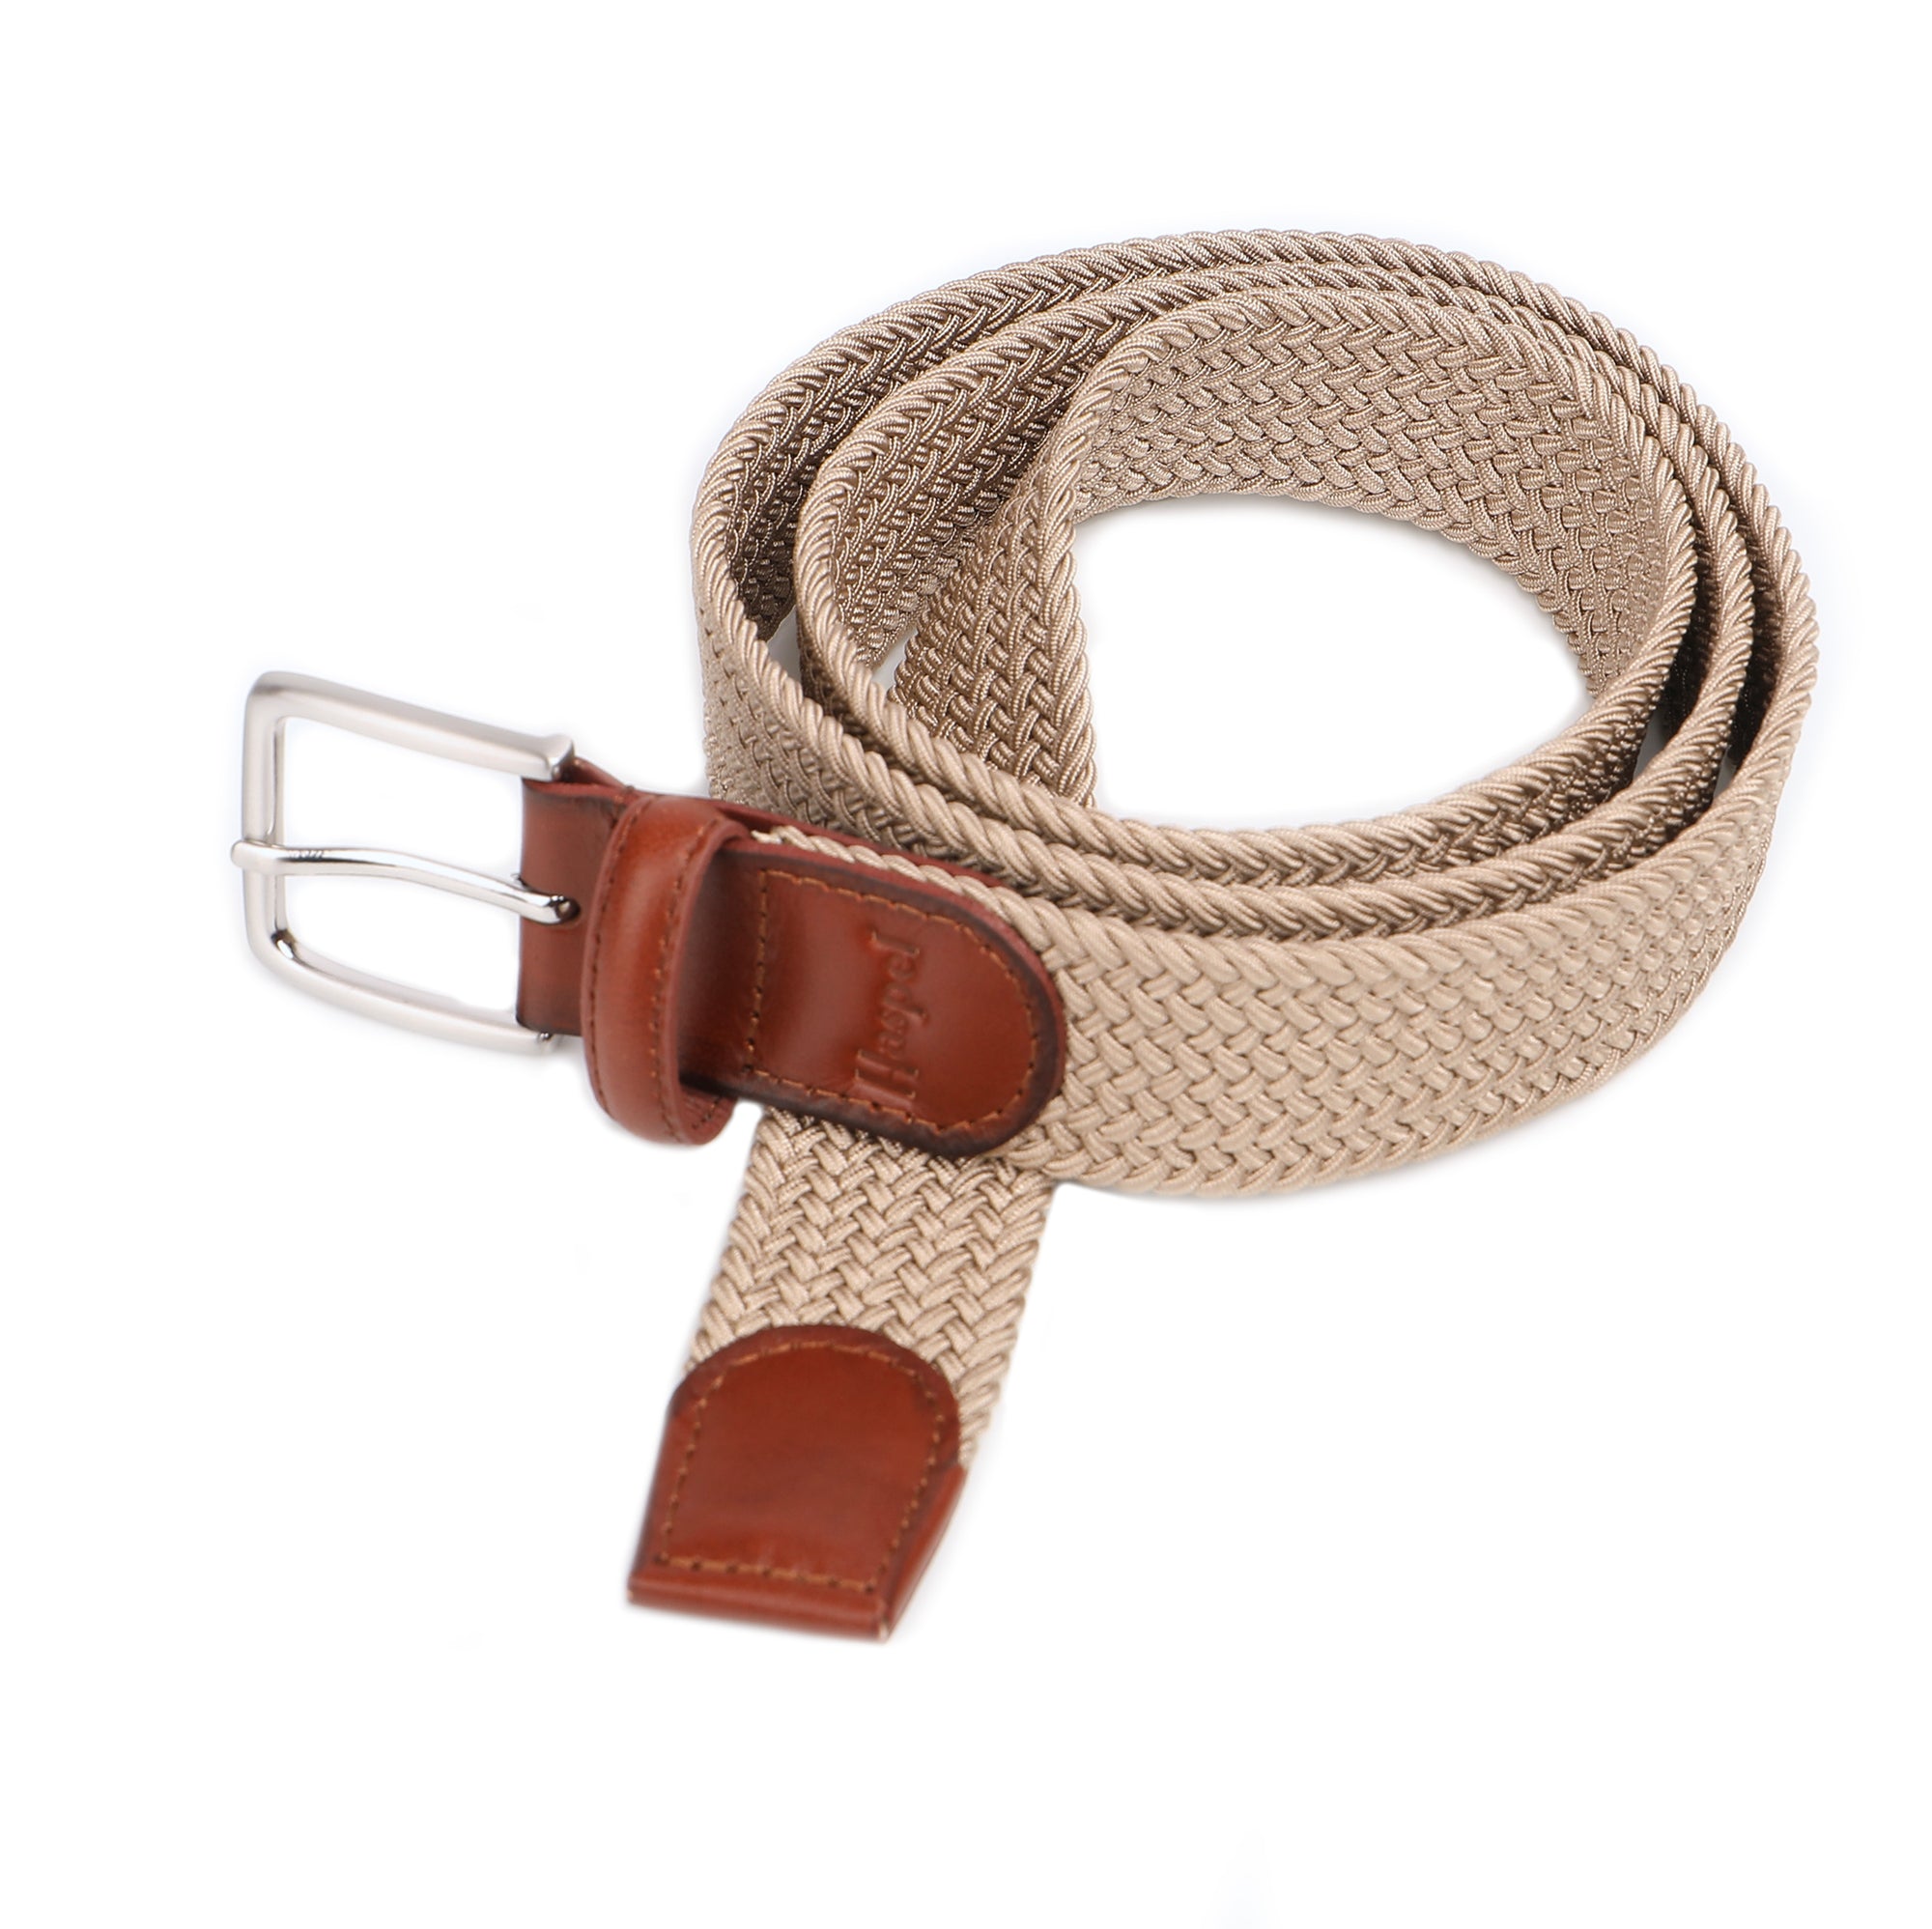 Our braided belts are woven to add a rich style to any look. Featuring leather end tabs, a solid nickel buckle with antique finish, and color choices in both solid and mult-colored of braided elastic.  Alpha Sizing • Braided elastic • Leather End Tabs • 1-1/4" Wide • Solid Nickel Buckle, Antique Finish • Imported 